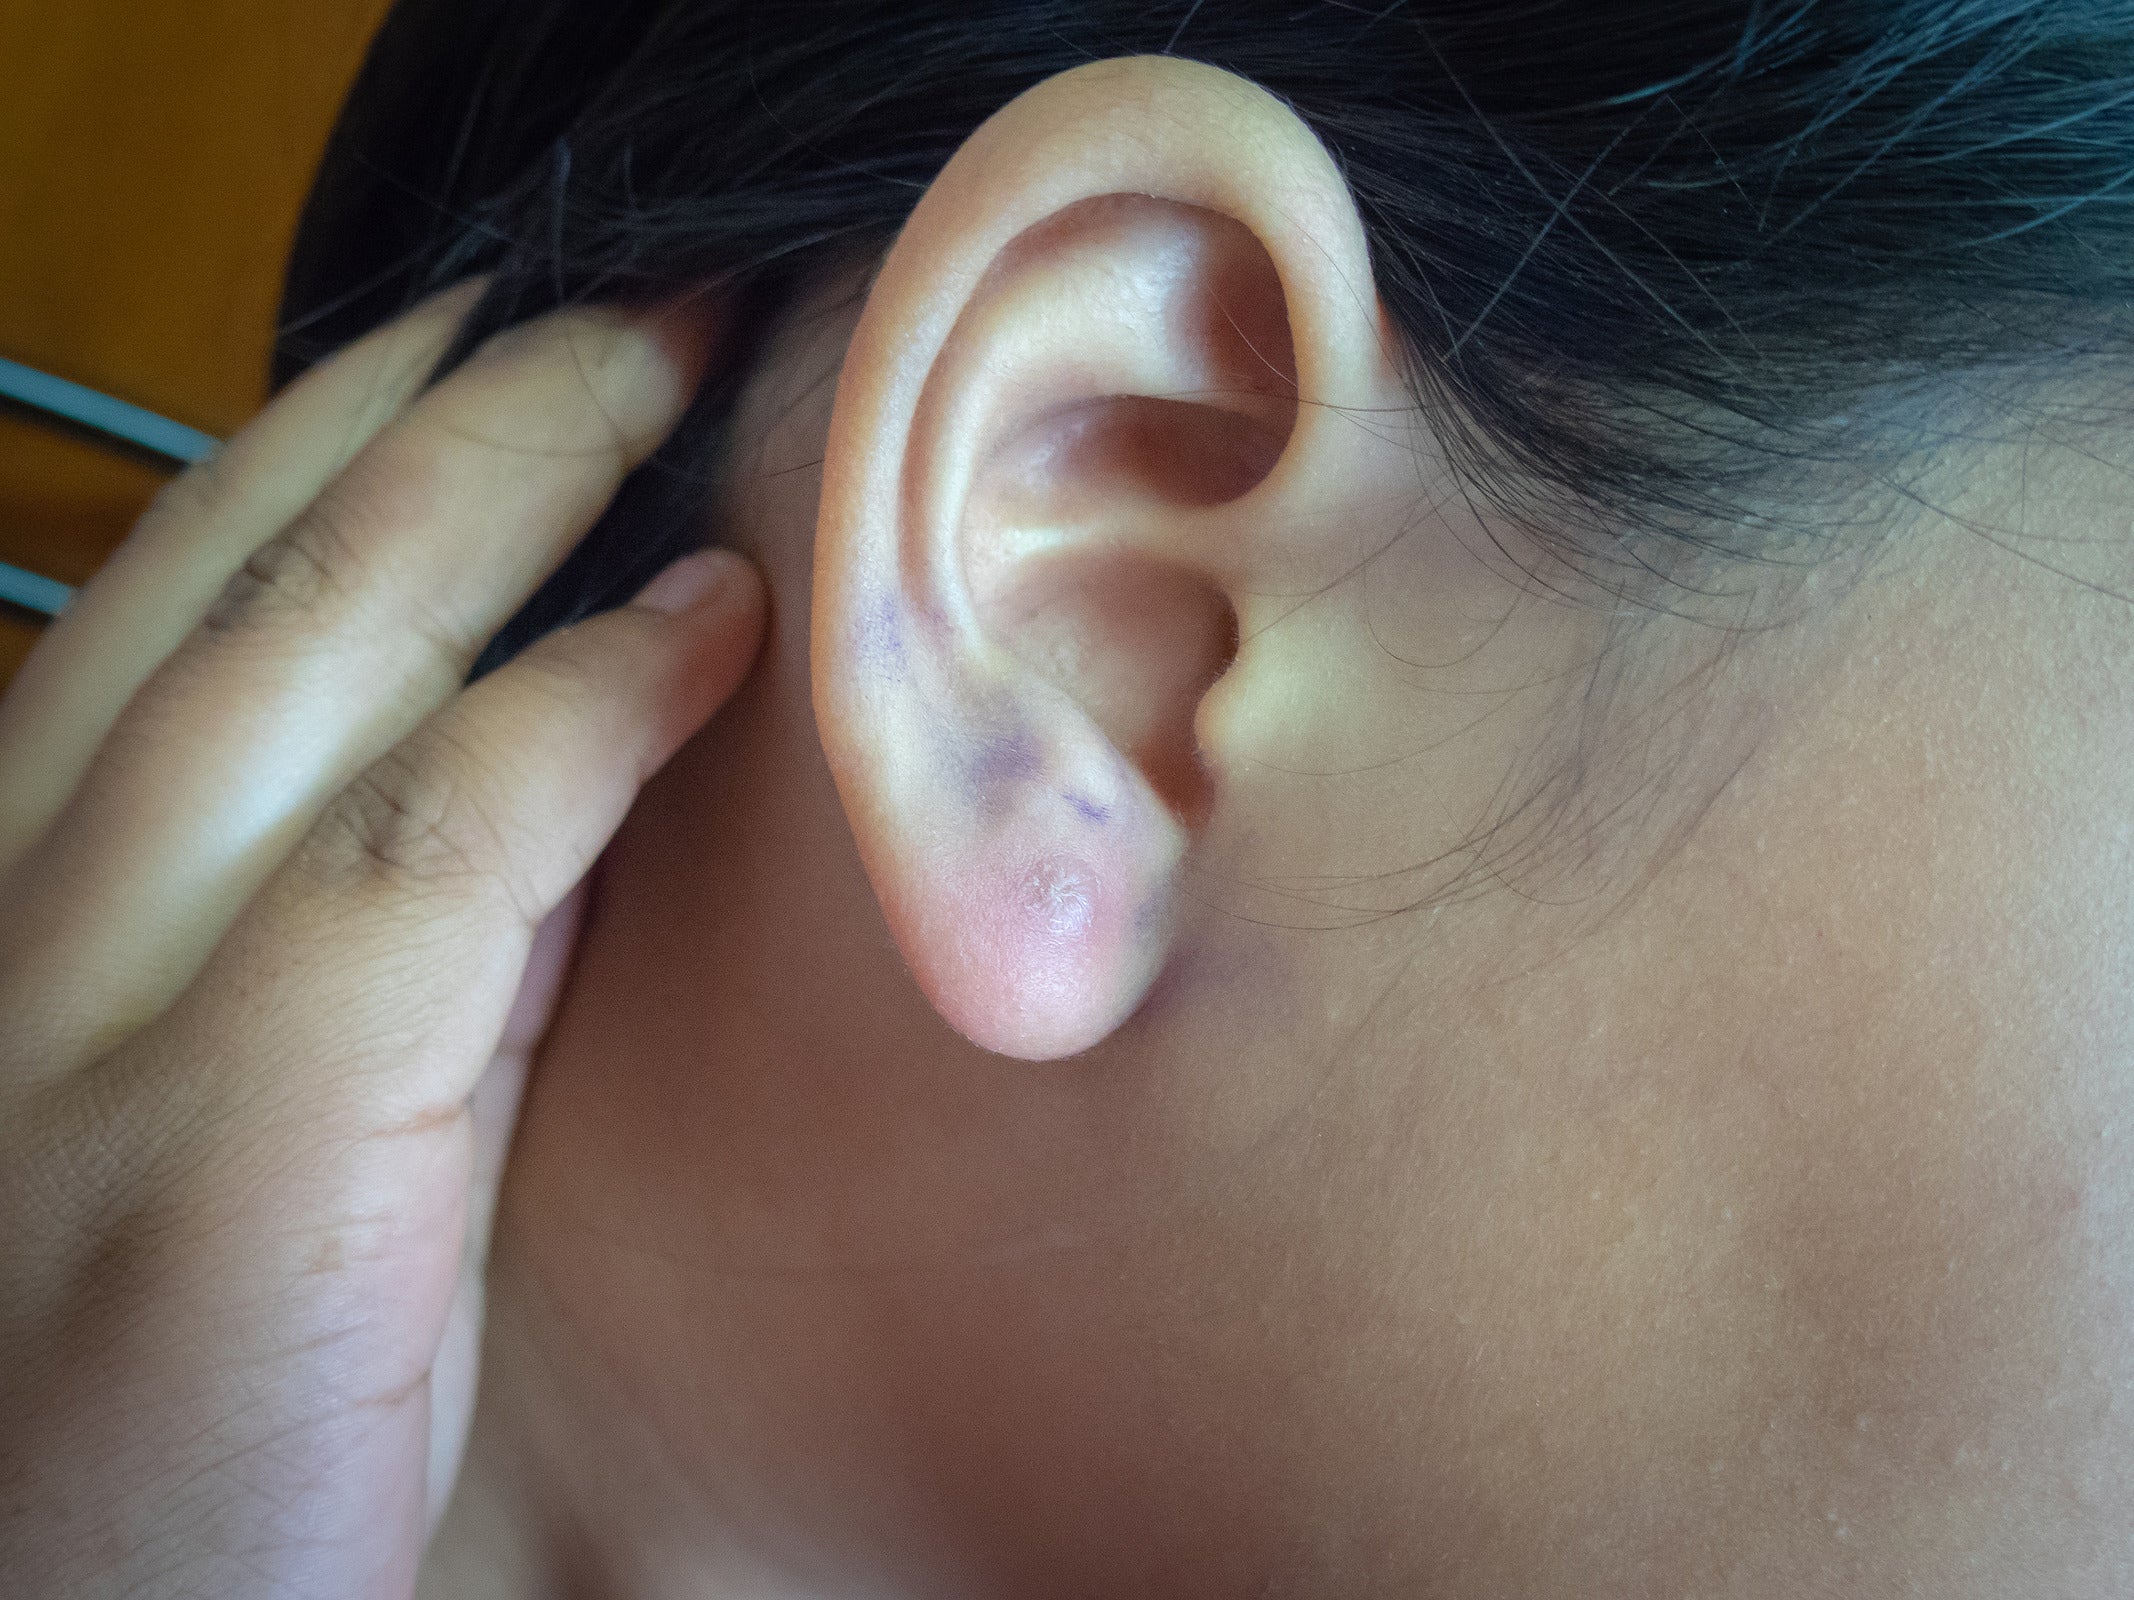 Infection caused by ear piercing pain